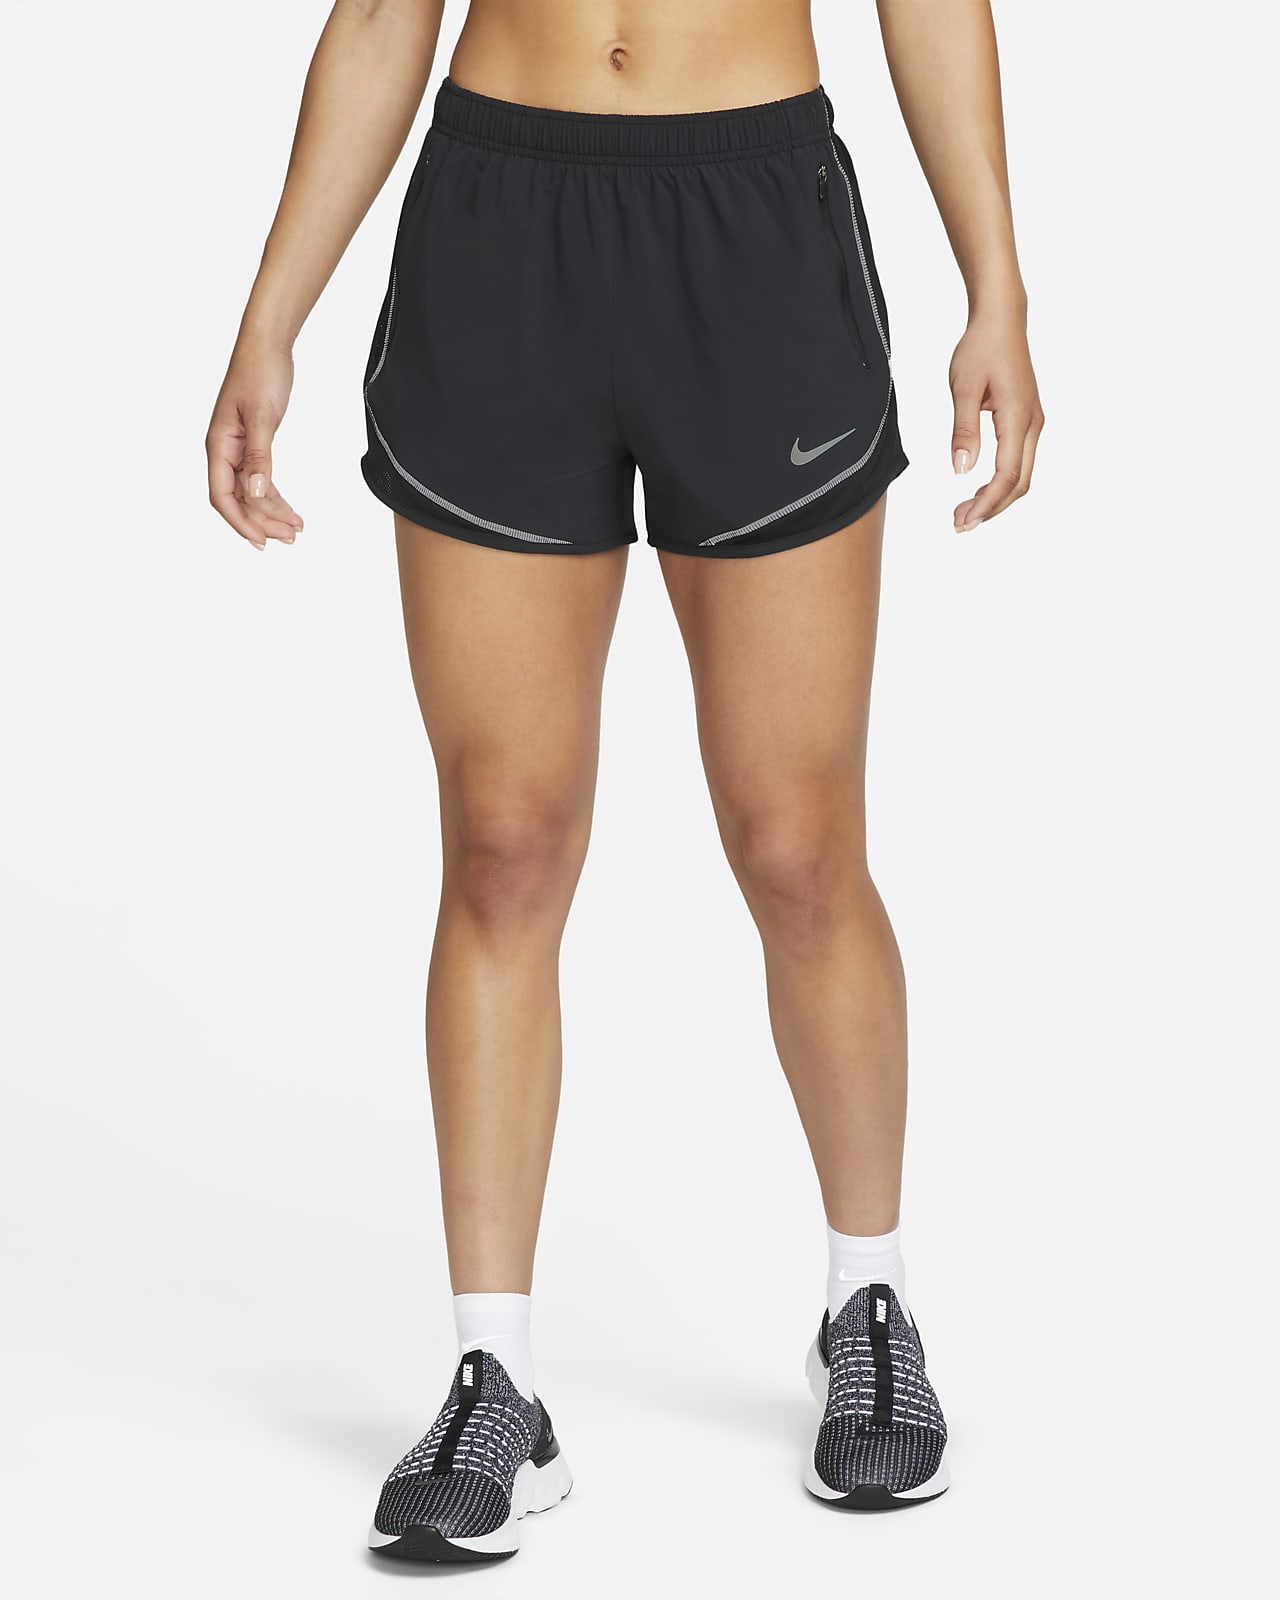 Nike Dri-FIT Run Division Tempo Luxe Women's Running Shorts